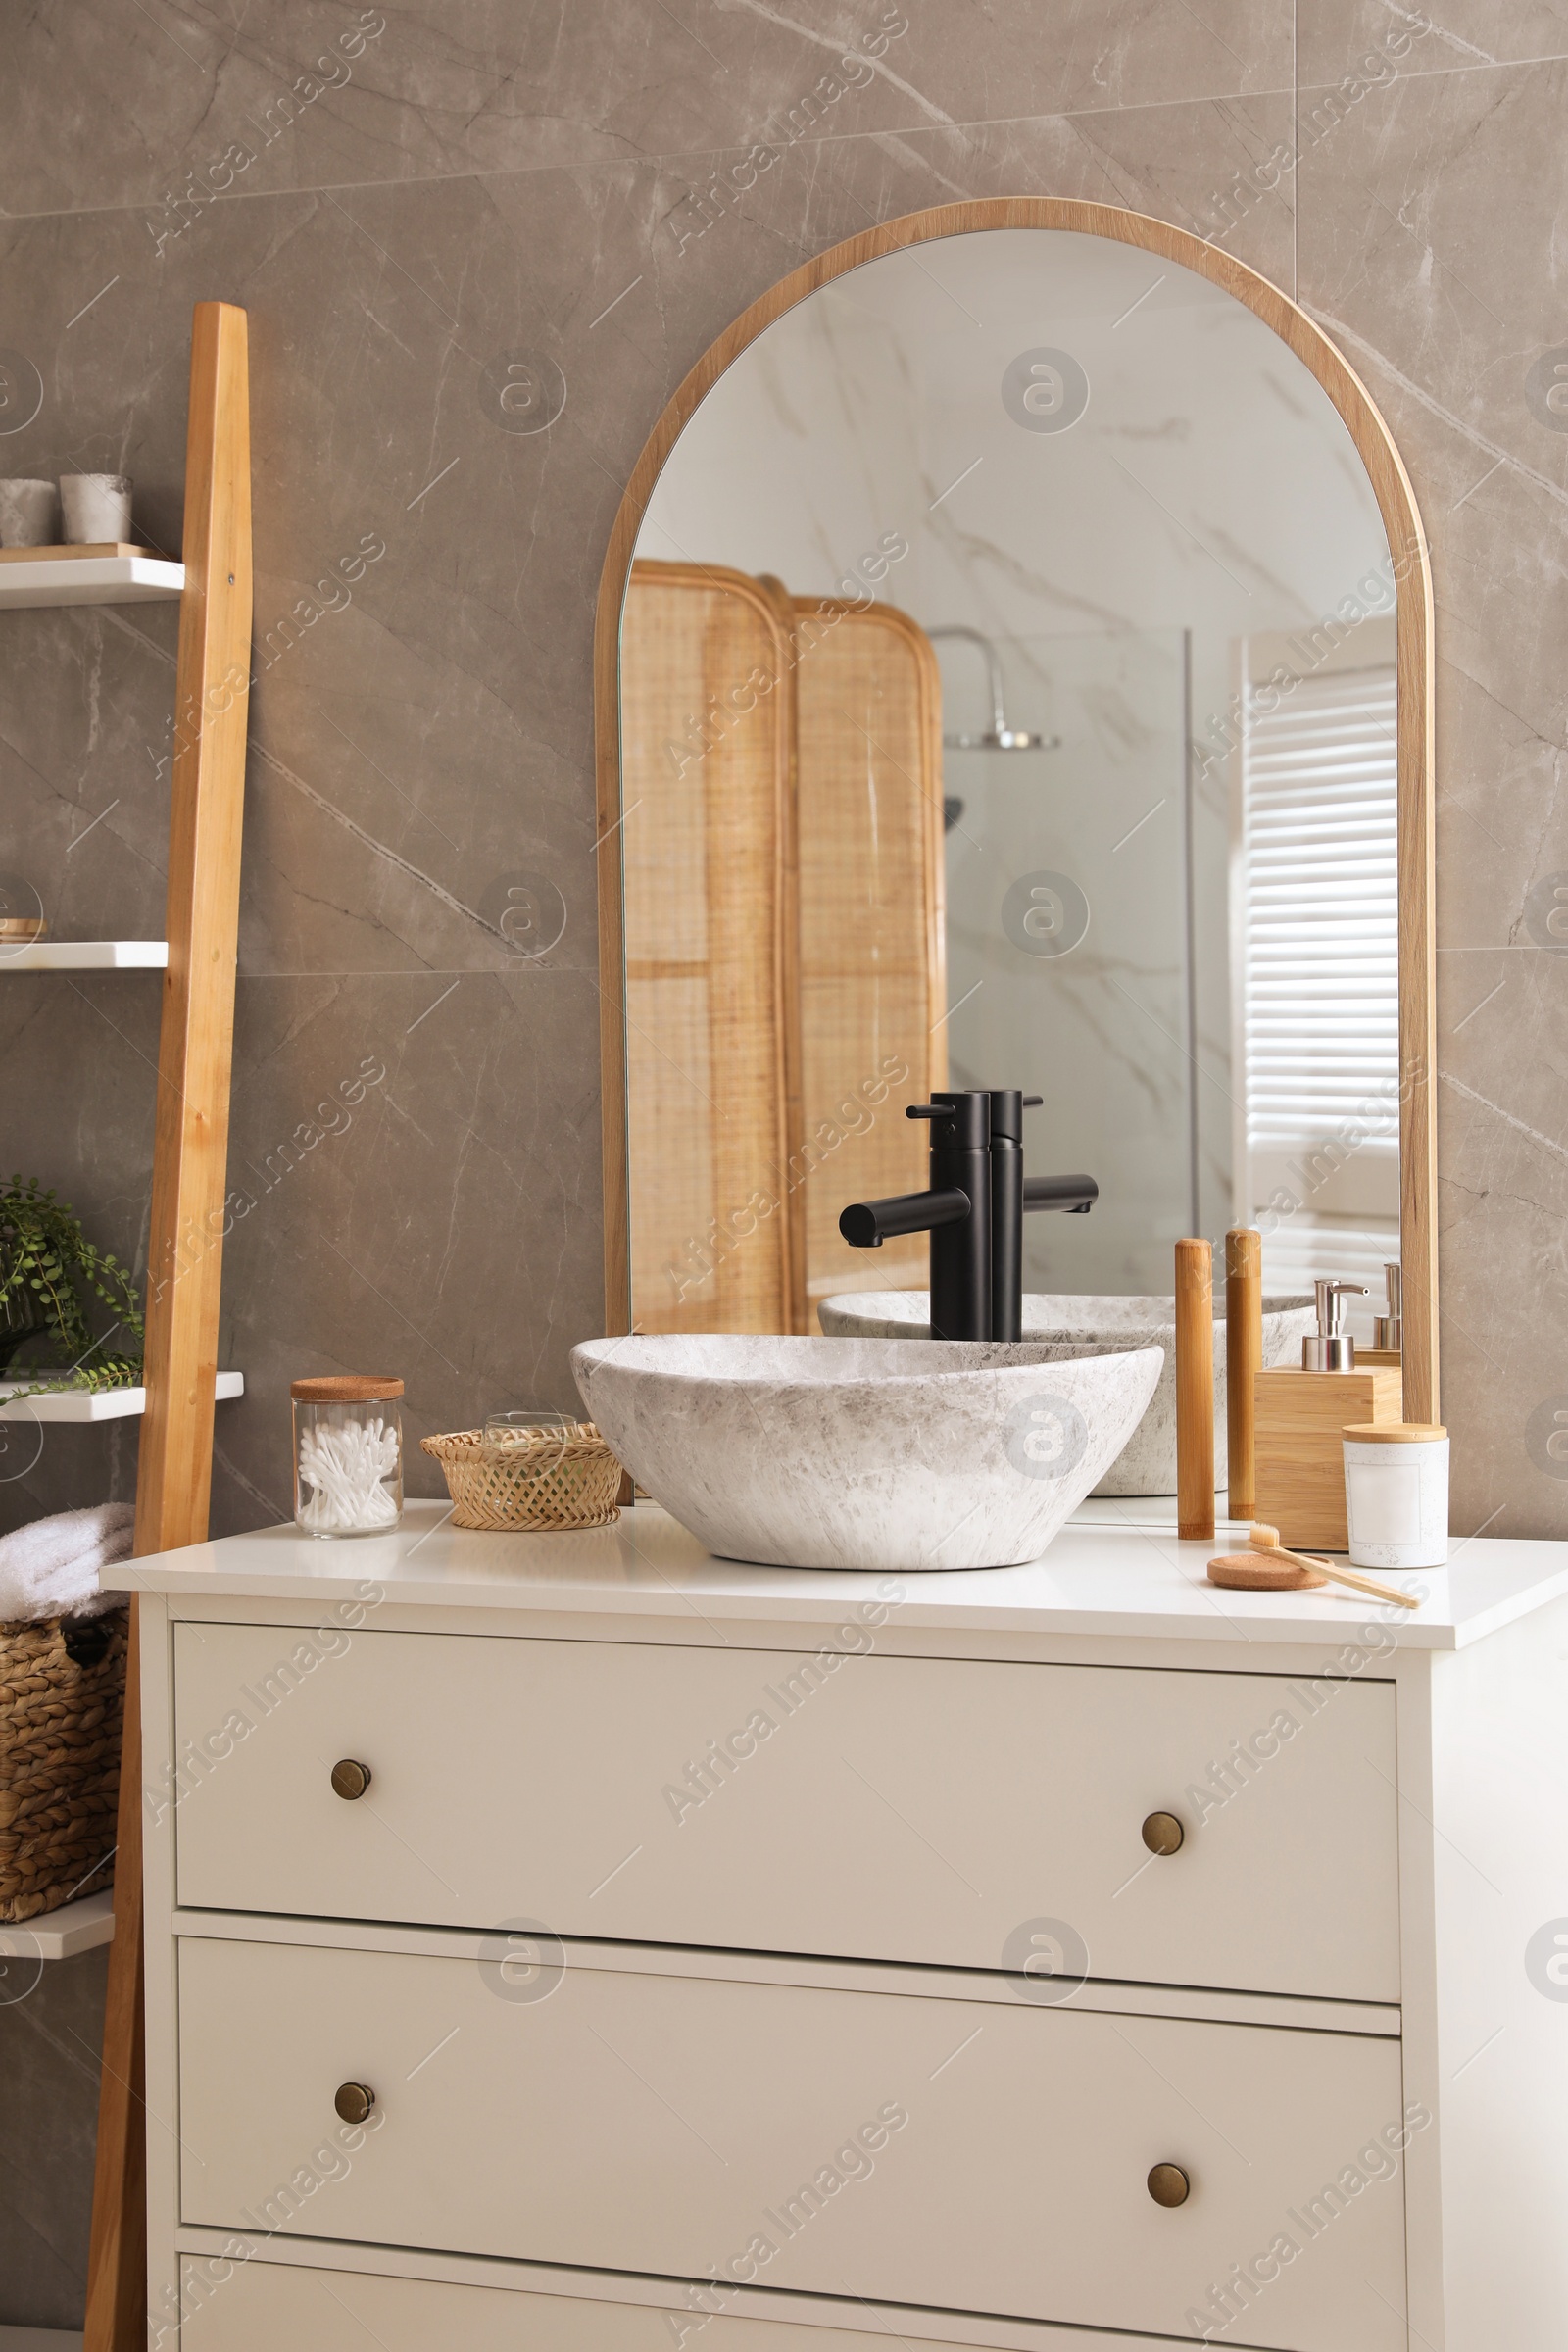 Photo of Chest of drawers with sink, mirror and toiletries in bathroom. Interior design